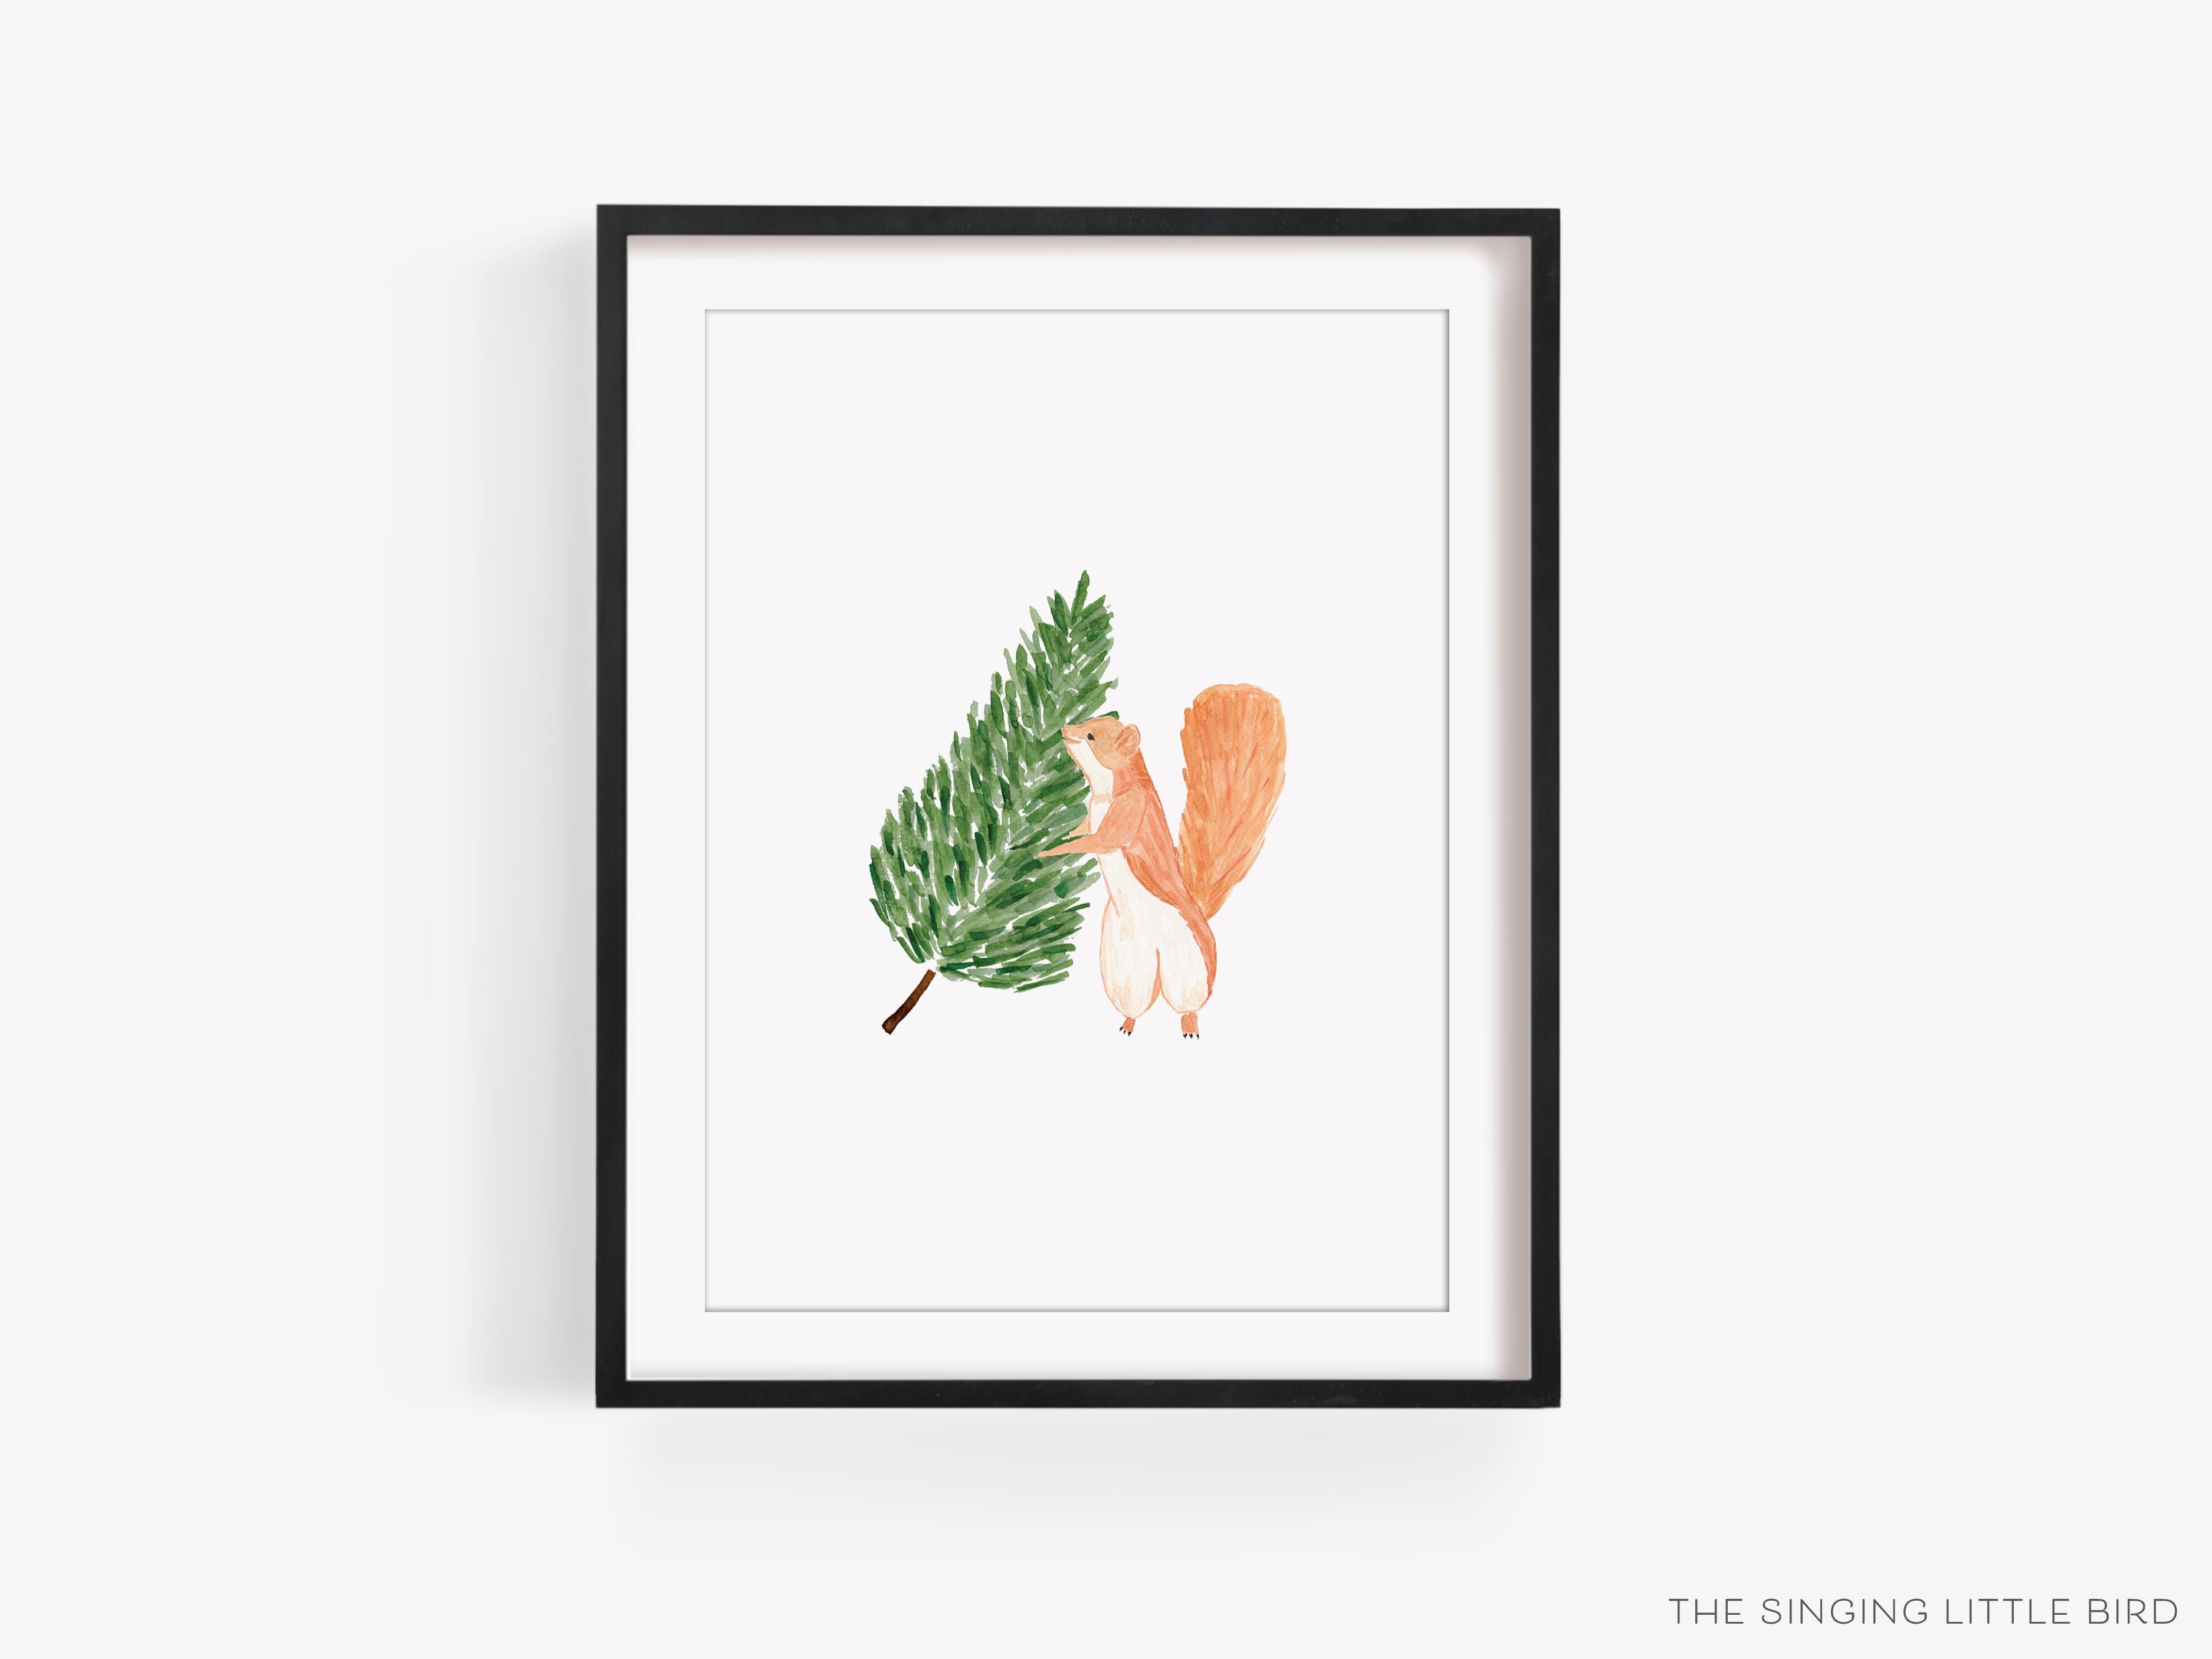 Tree Squirrel Art Print-This watercolor art print features our hand-painted tree and squirrel, printed in the USA on 120lb high quality art paper. This makes a great gift or wall decor for the animal lover in your life.-The Singing Little Bird